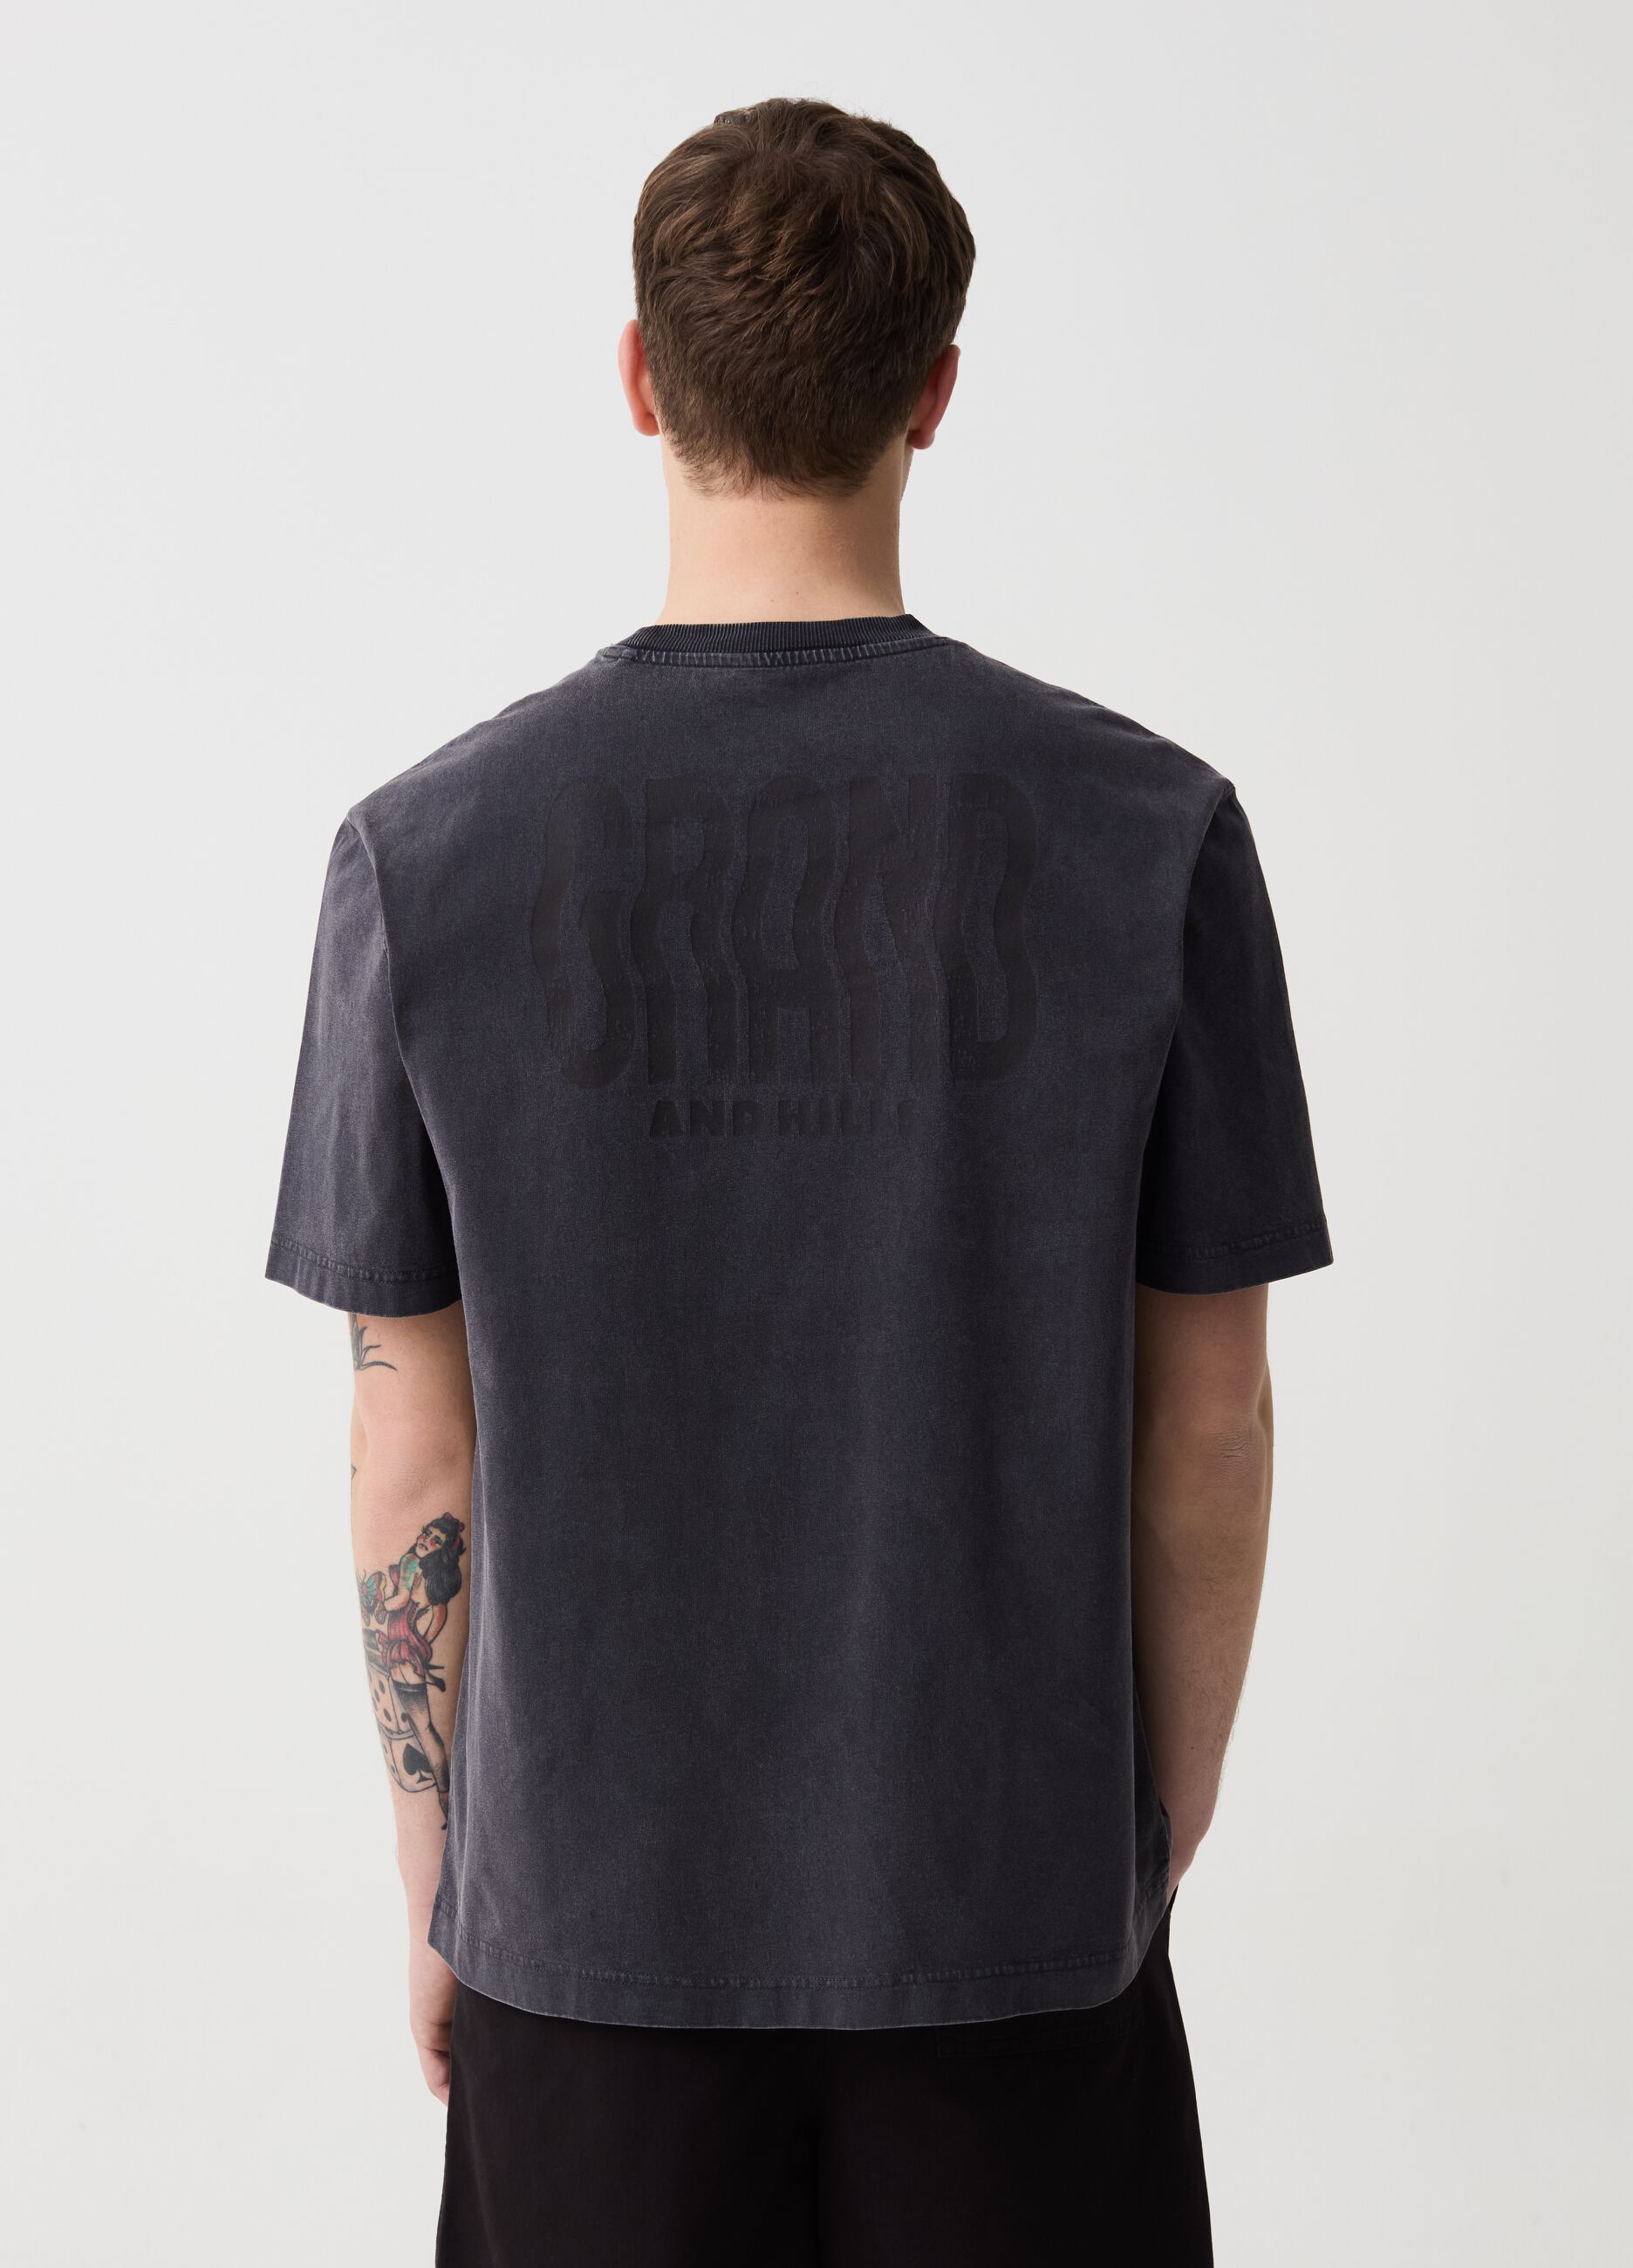 T-shirt with print and acid wash effect